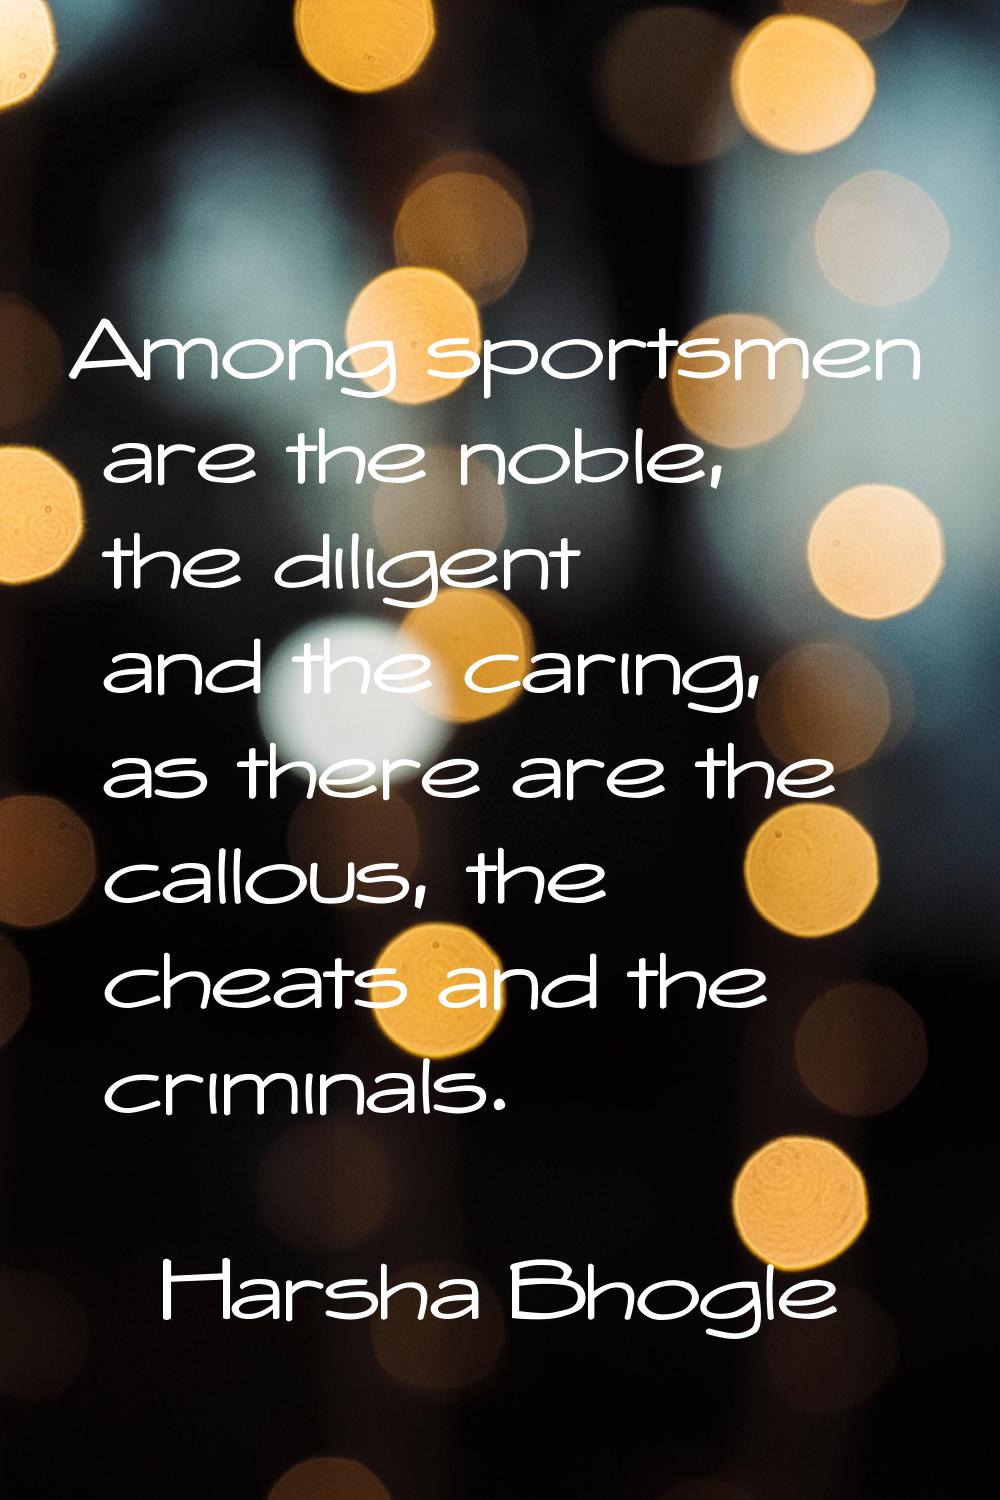 Among sportsmen are the noble, the diligent and the caring, as there are the callous, the cheats an